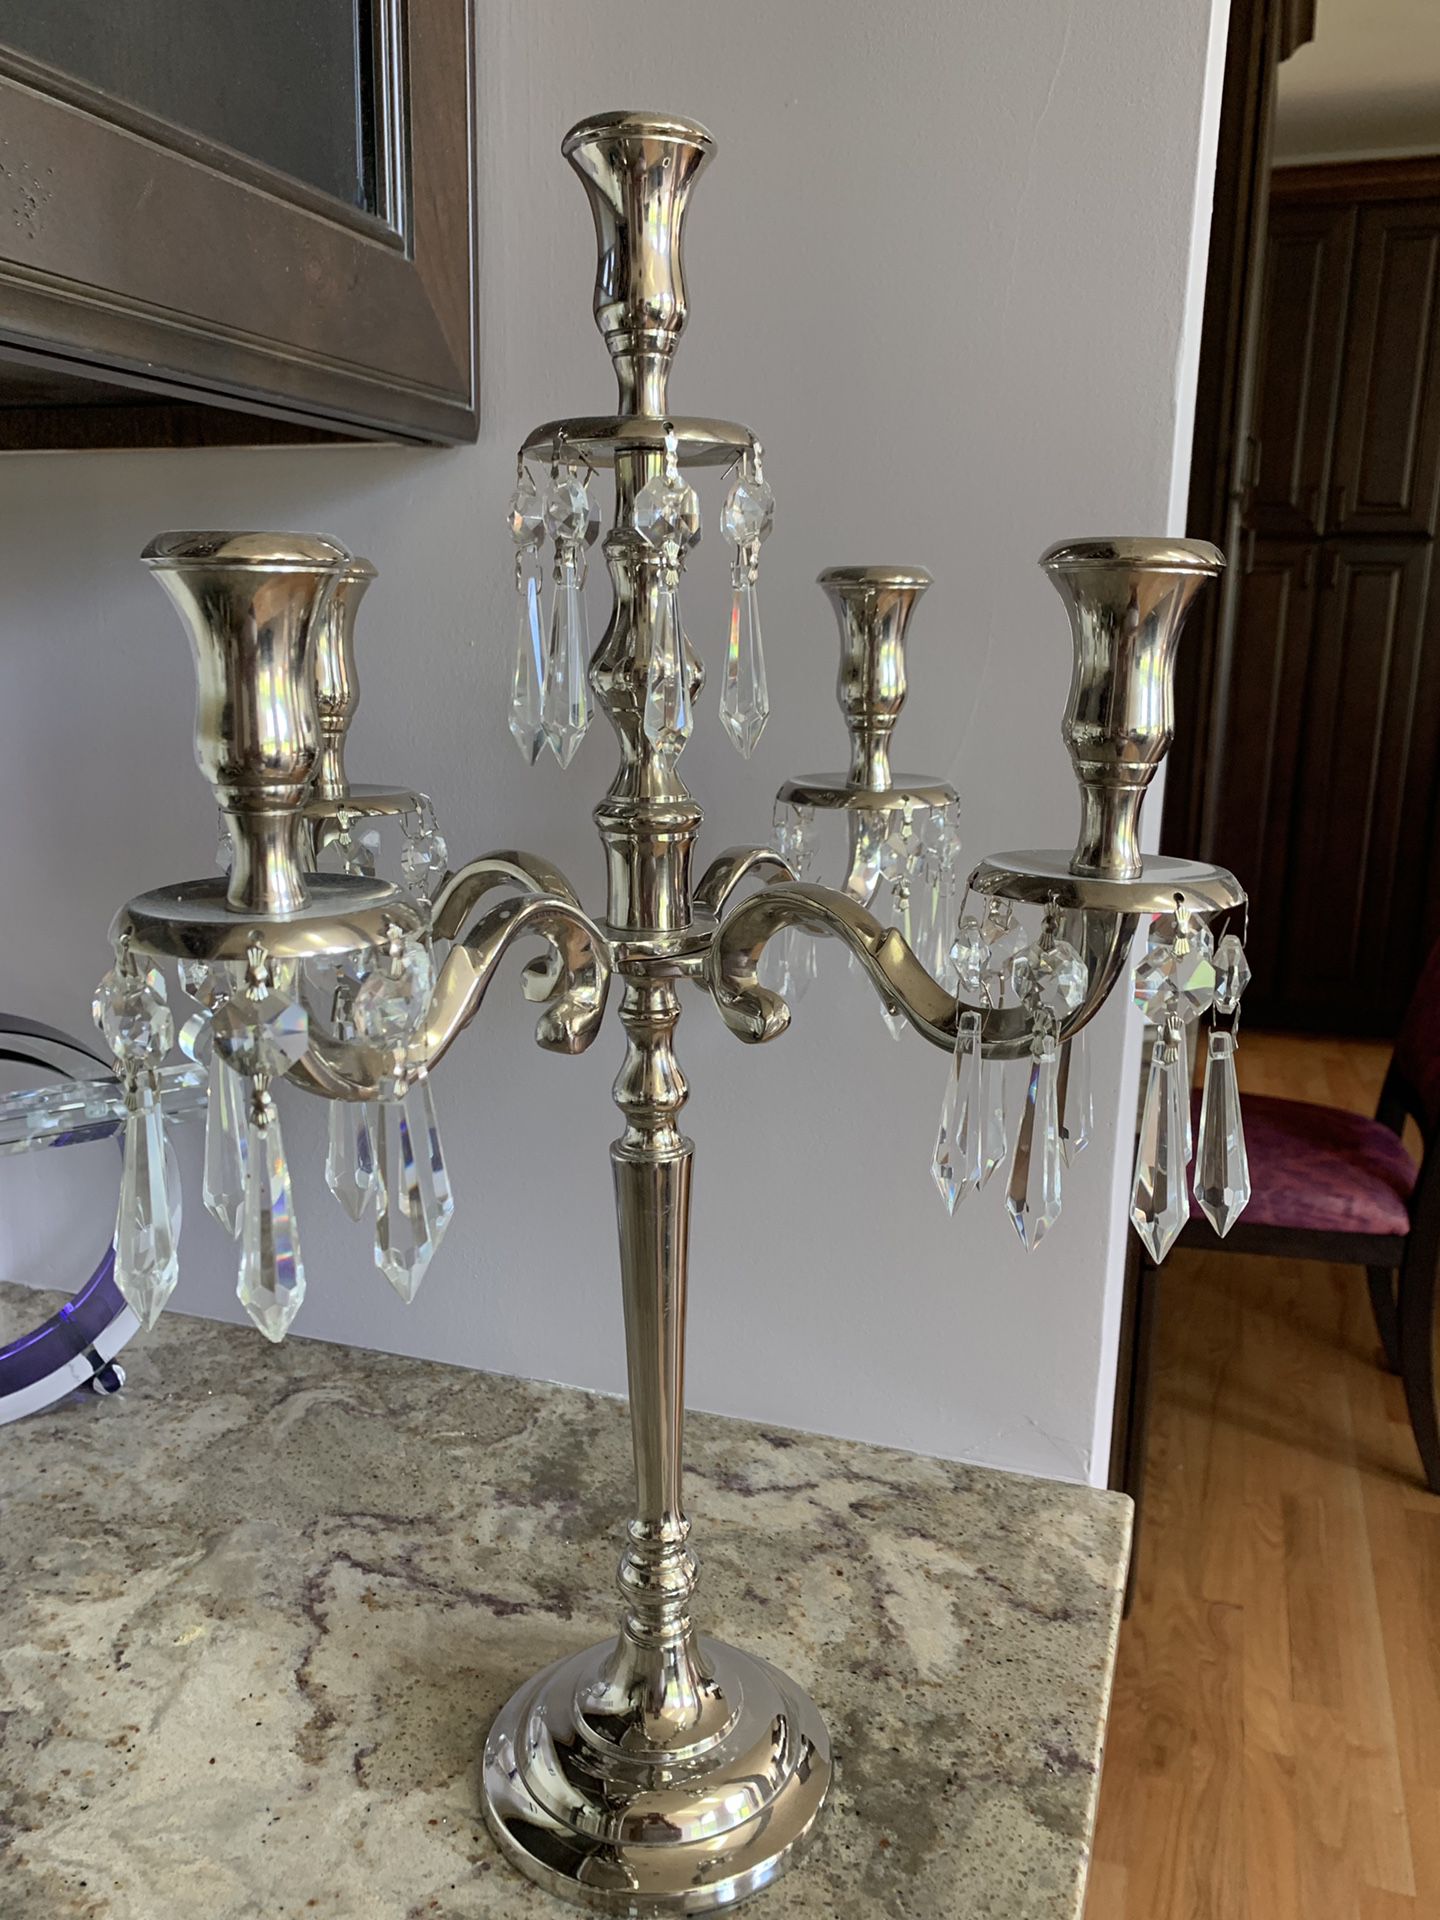 Stunning silver and crystal candelabra